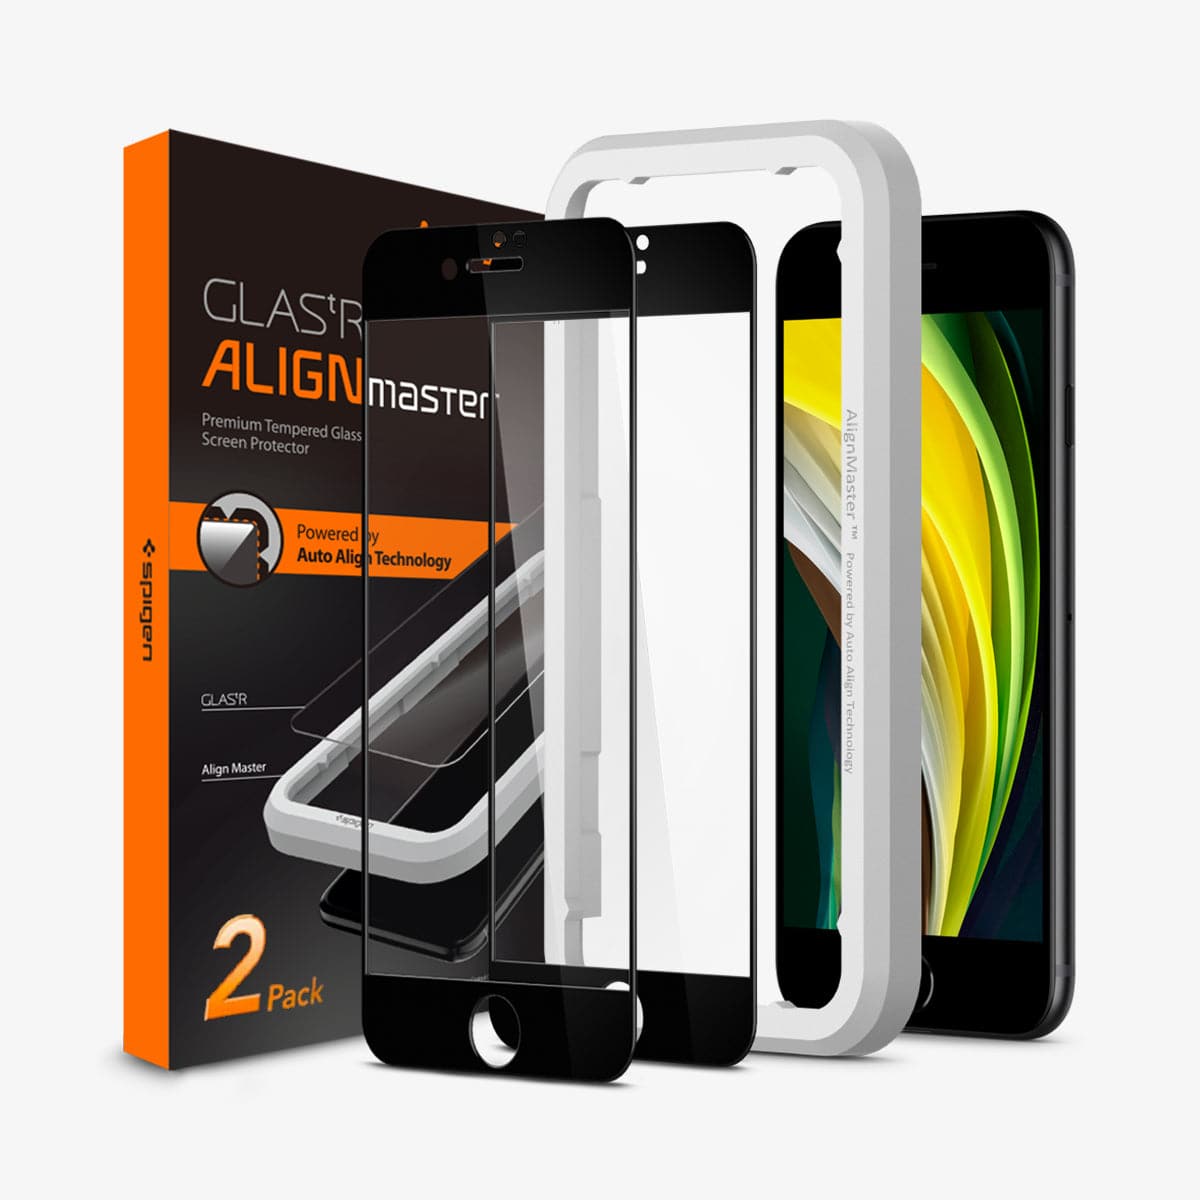 AGL01302 - iPhone 8 Alignmaster Full Cover Screen Protector in black showing the device, alignmaster tray, two screen protectors and packaging